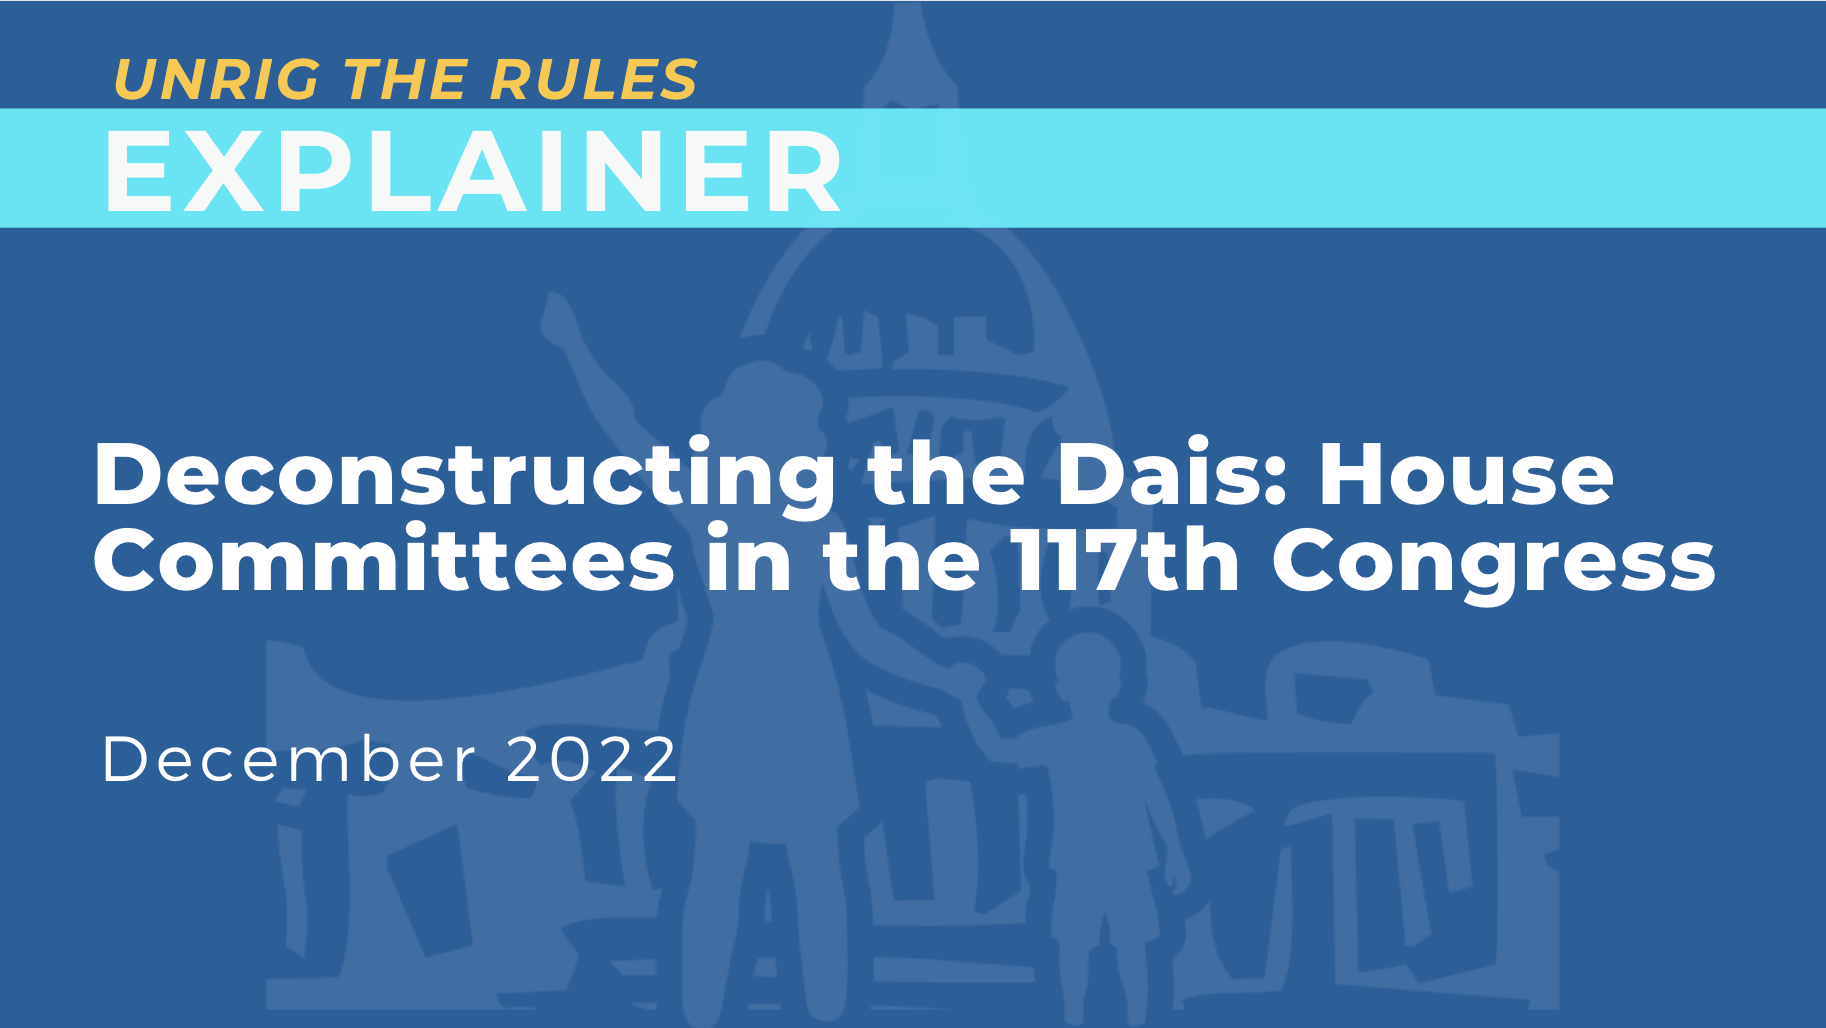 Deconstructing the Dais: House Committees in the 117th Congress